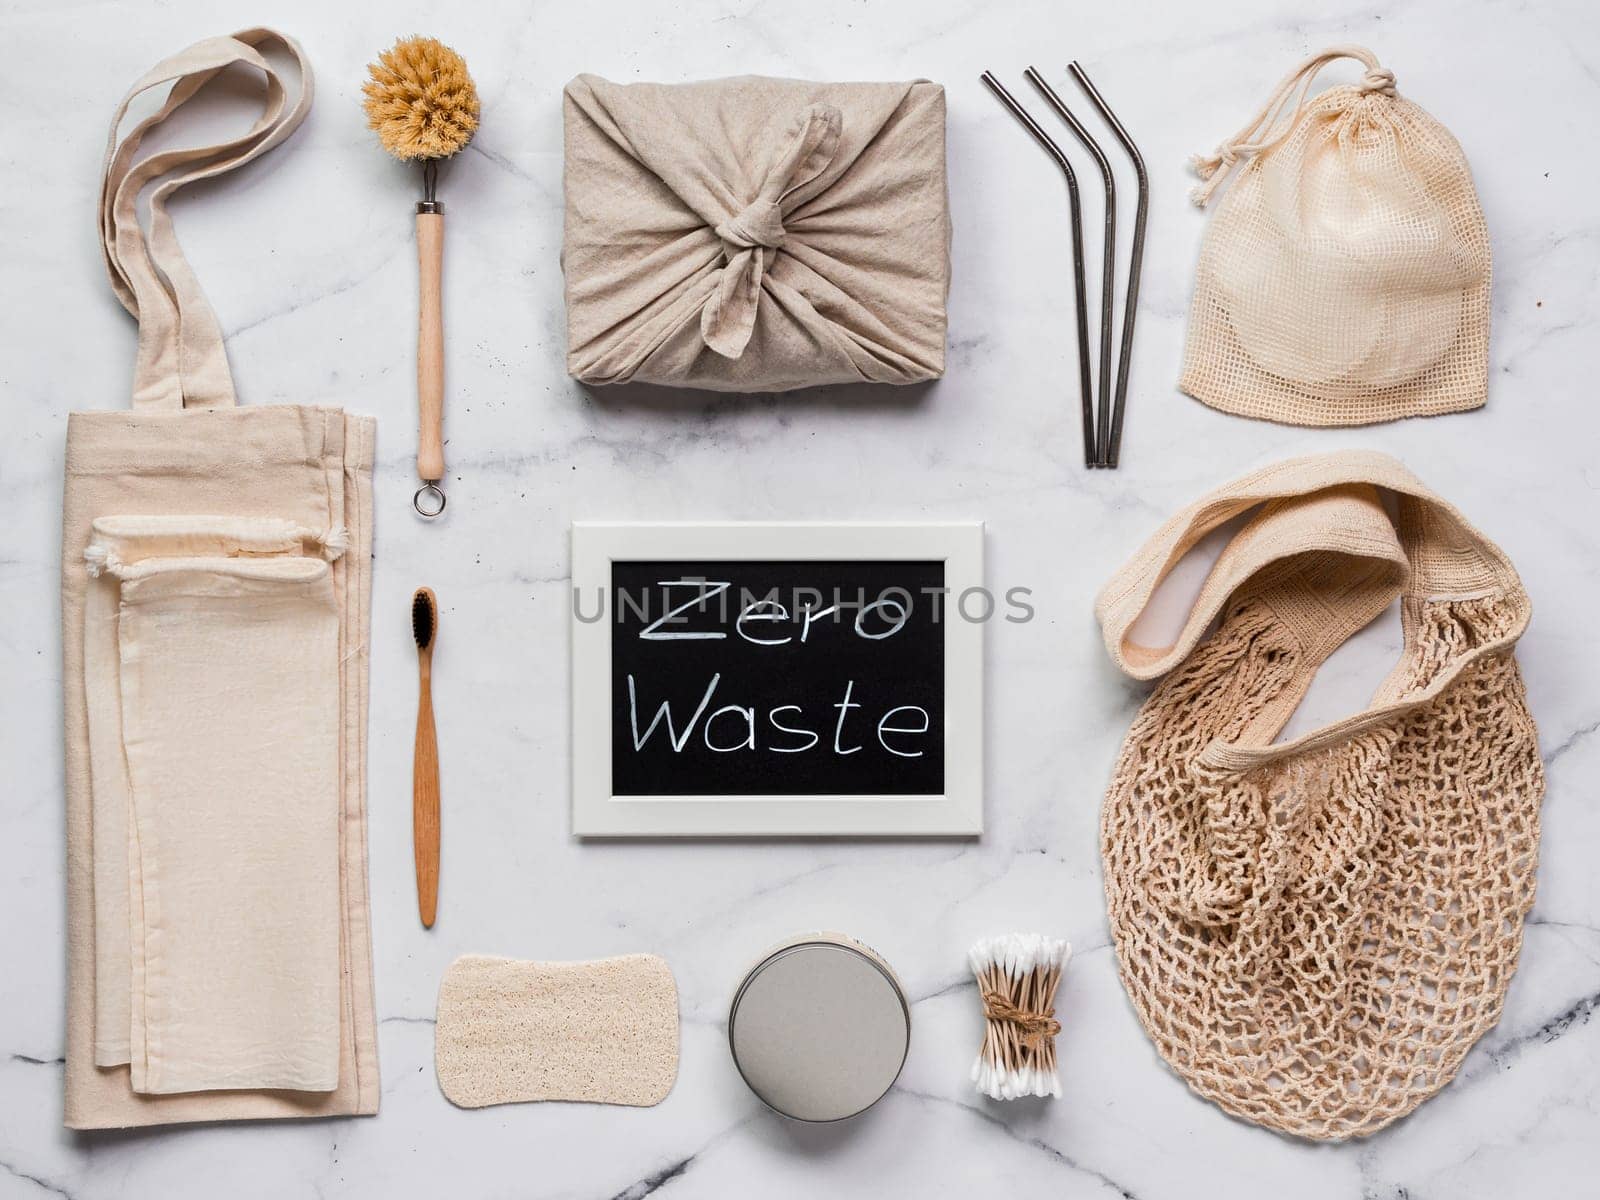 Zero waste concept. Textile wrapping gift, eco bags, metal straws, eco-friendly kitchen tools, bamboo toothbrush and cotton buds, reusable cotton pads on white marble background. Top view or flat lay